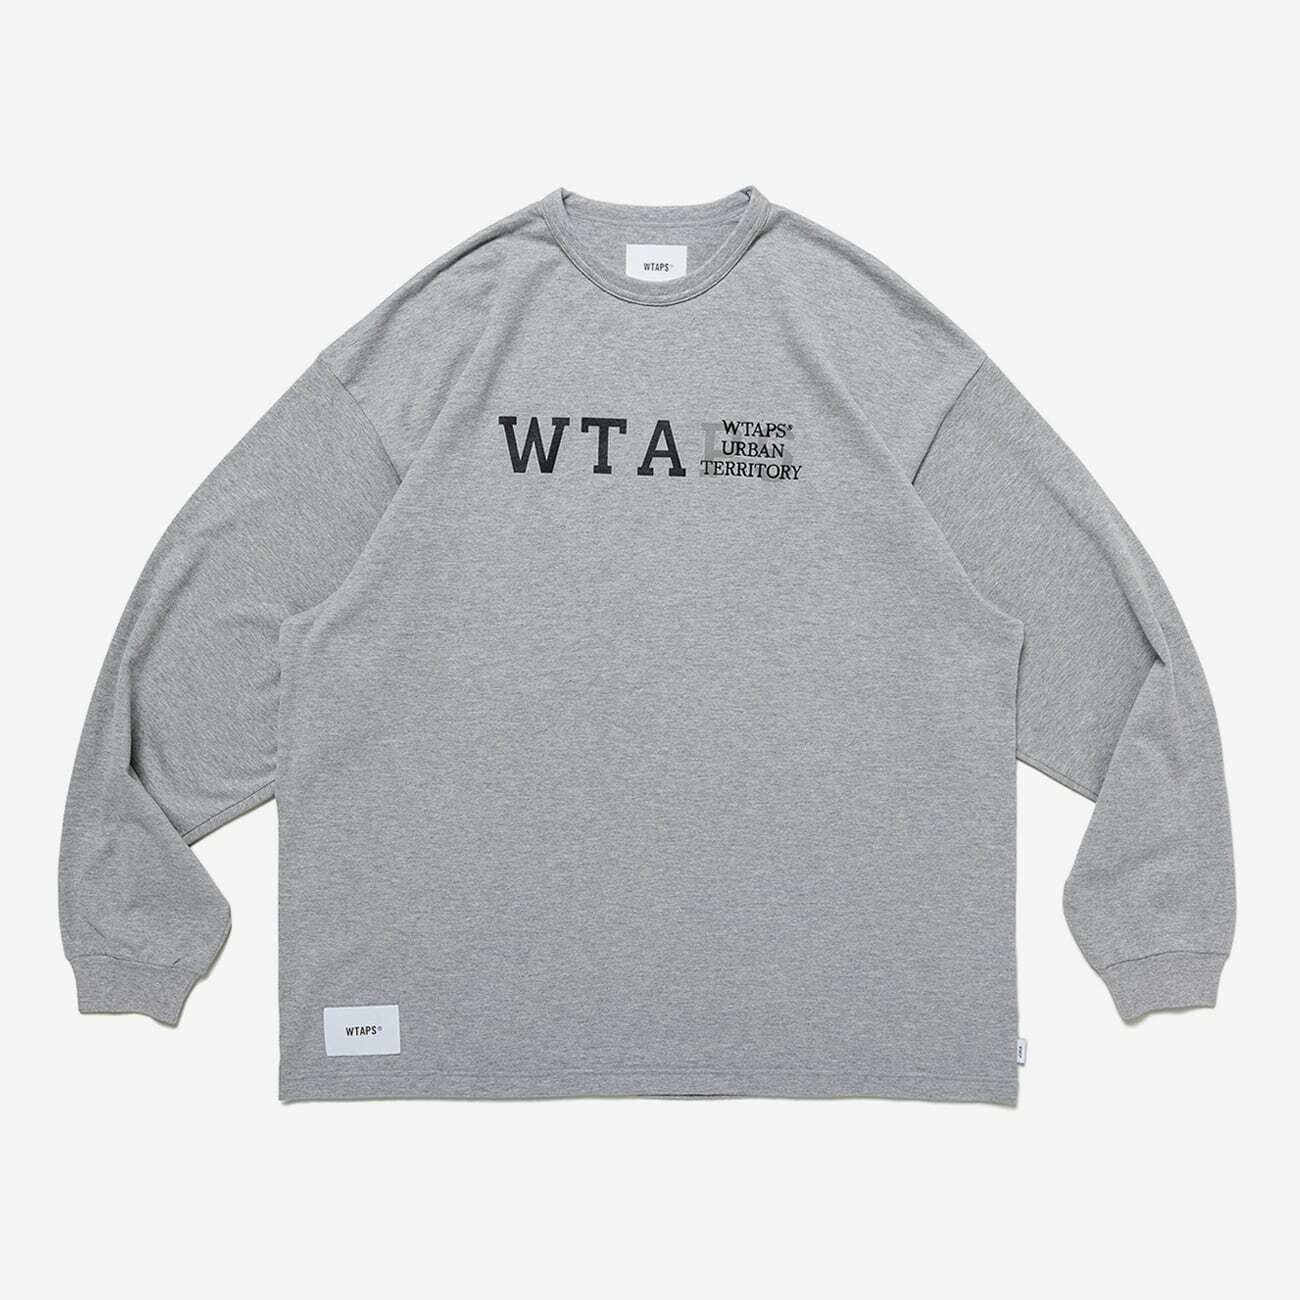 23SS WTAPS COLLEGE SS COTTON BLACK XLトップス - Tシャツ/カットソー 